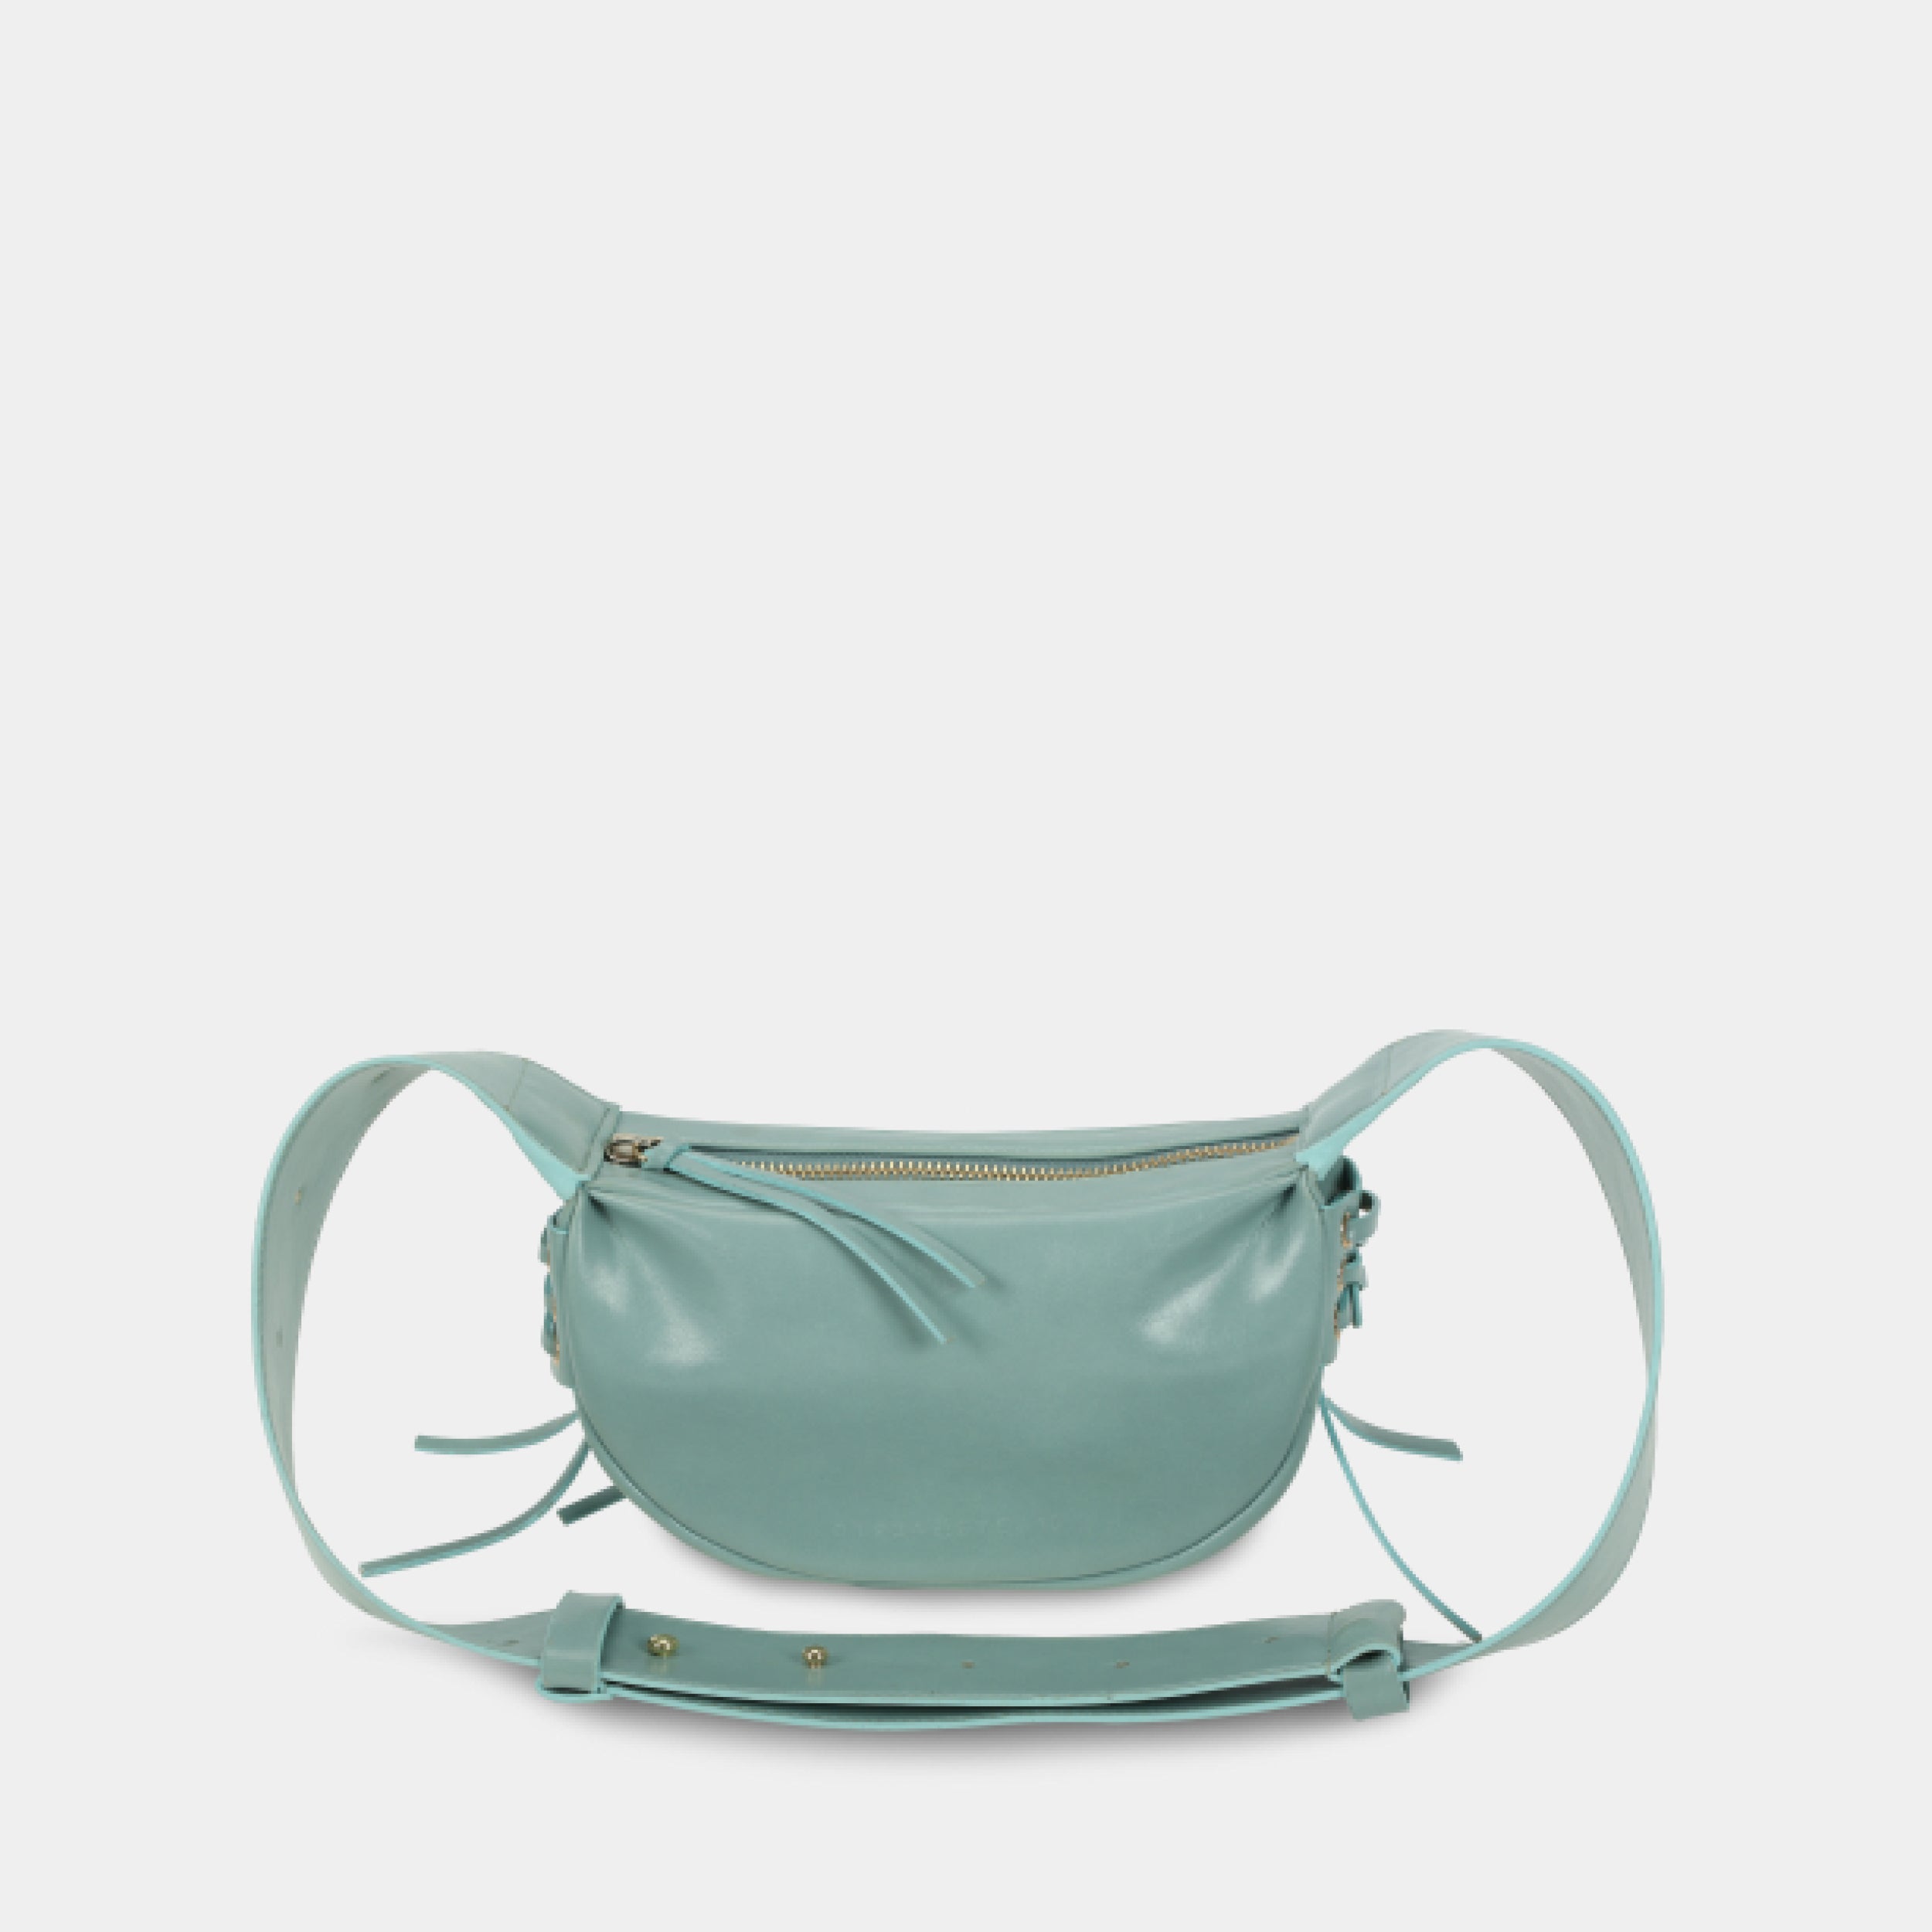 LACE bag small size (S) pastel turquoise